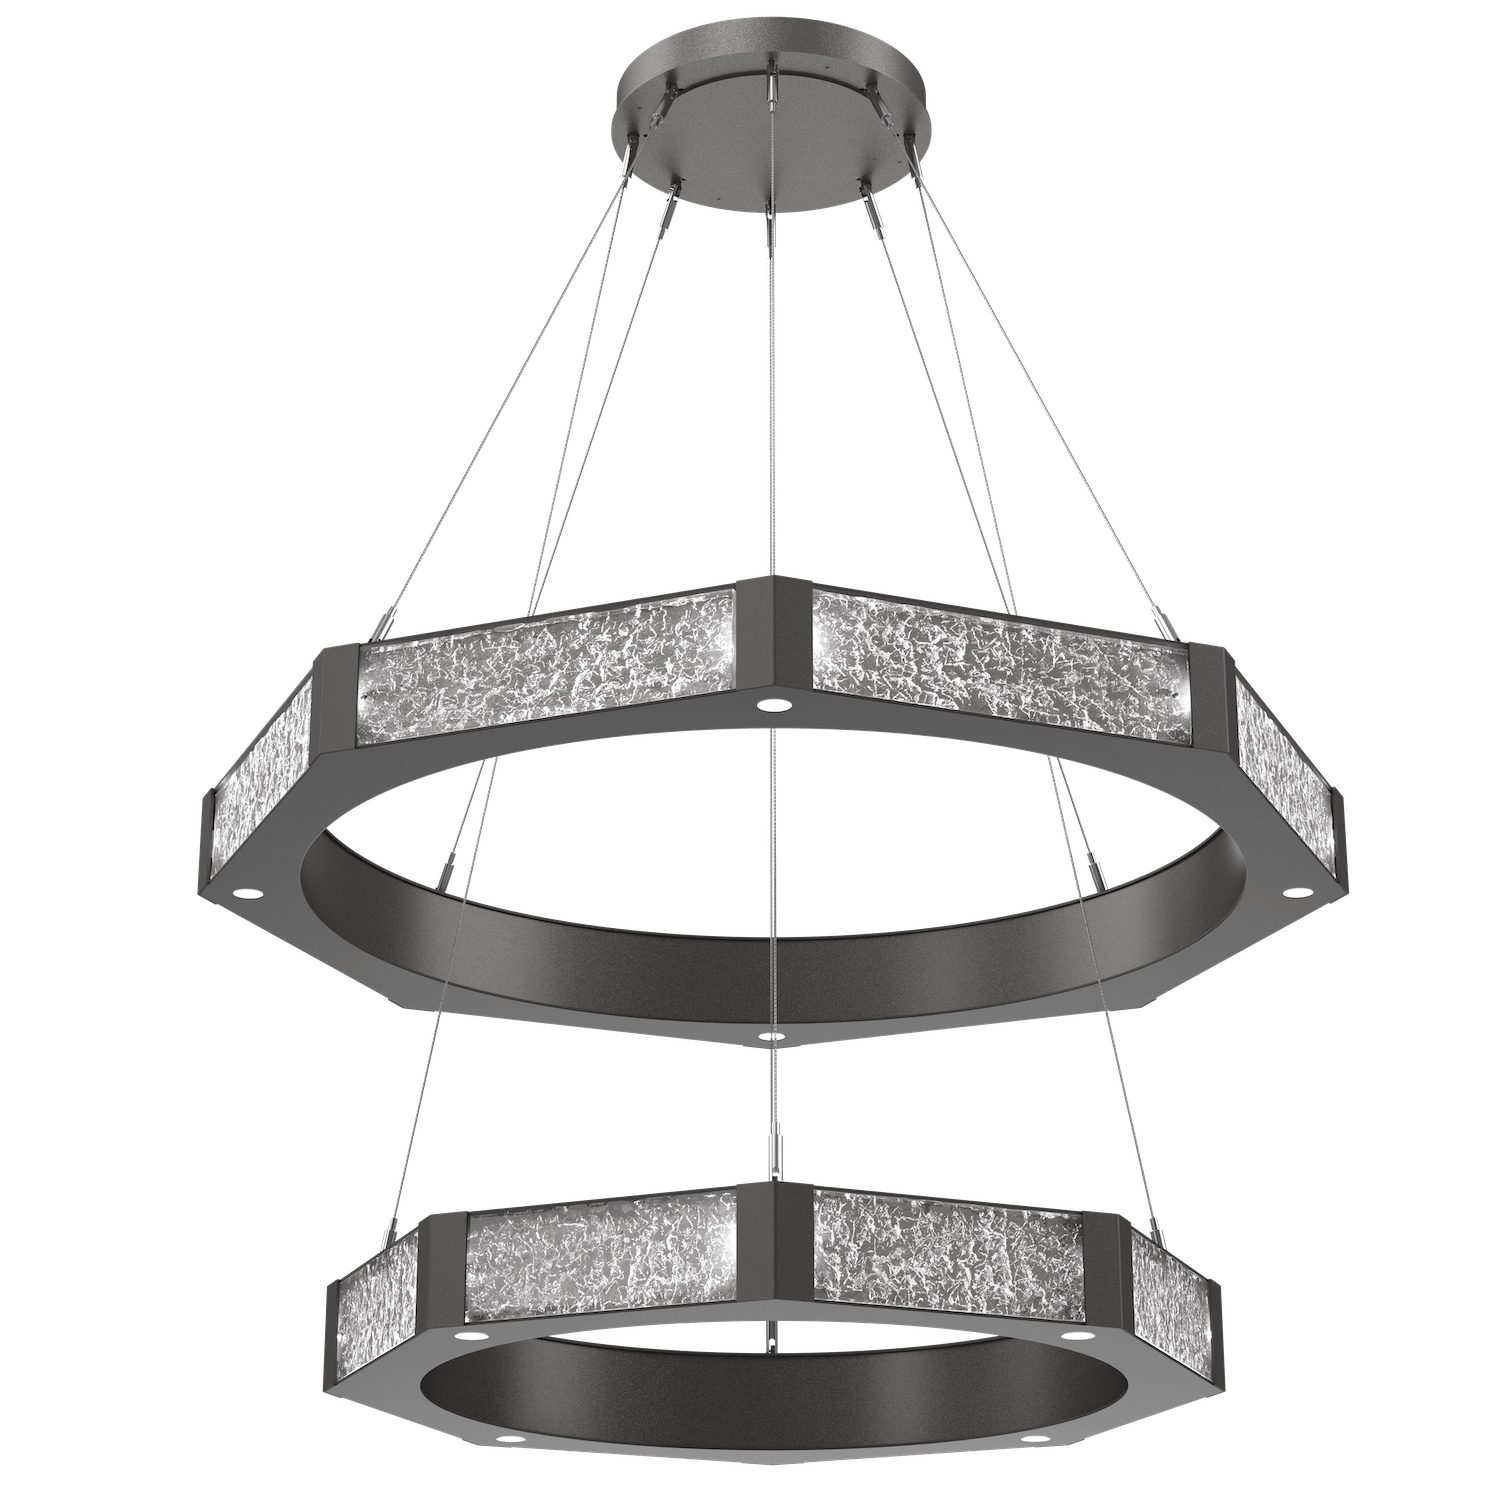 CHB0061-2B-GP-GC-Hammerton-Studio-Glacier-48-inch-two-tier-ring-chandelier-with-graphite-finish-and-clear-blown-glass-with-geo-clear-cast-glass-diffusers-and-LED-lamping